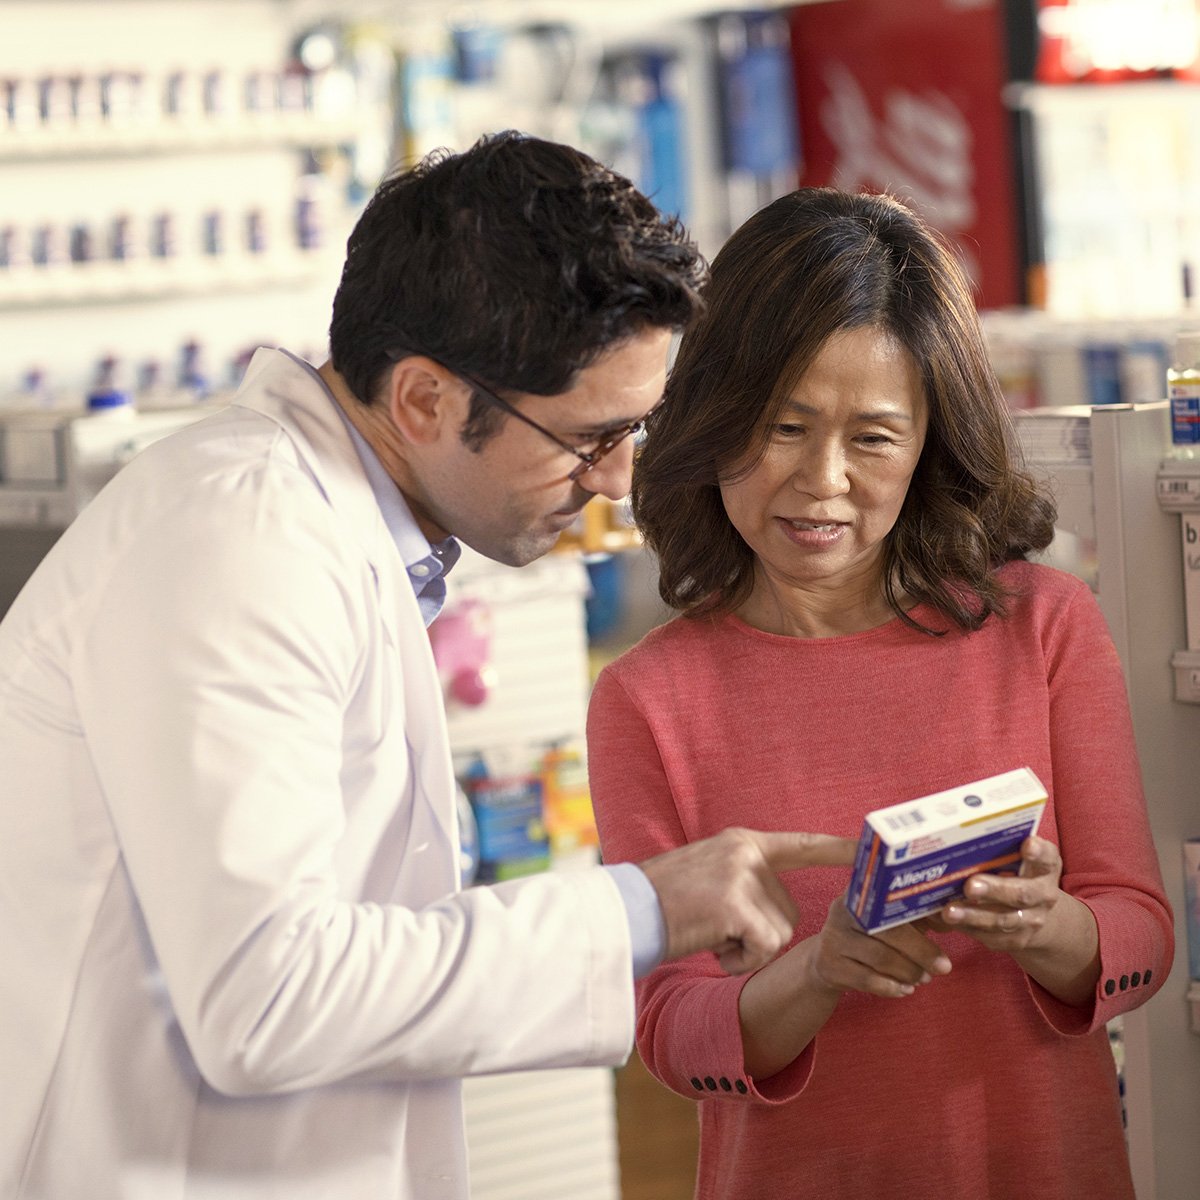 A pharmacist stands next to a patient helping her review and understand a box of medication she’s holding.